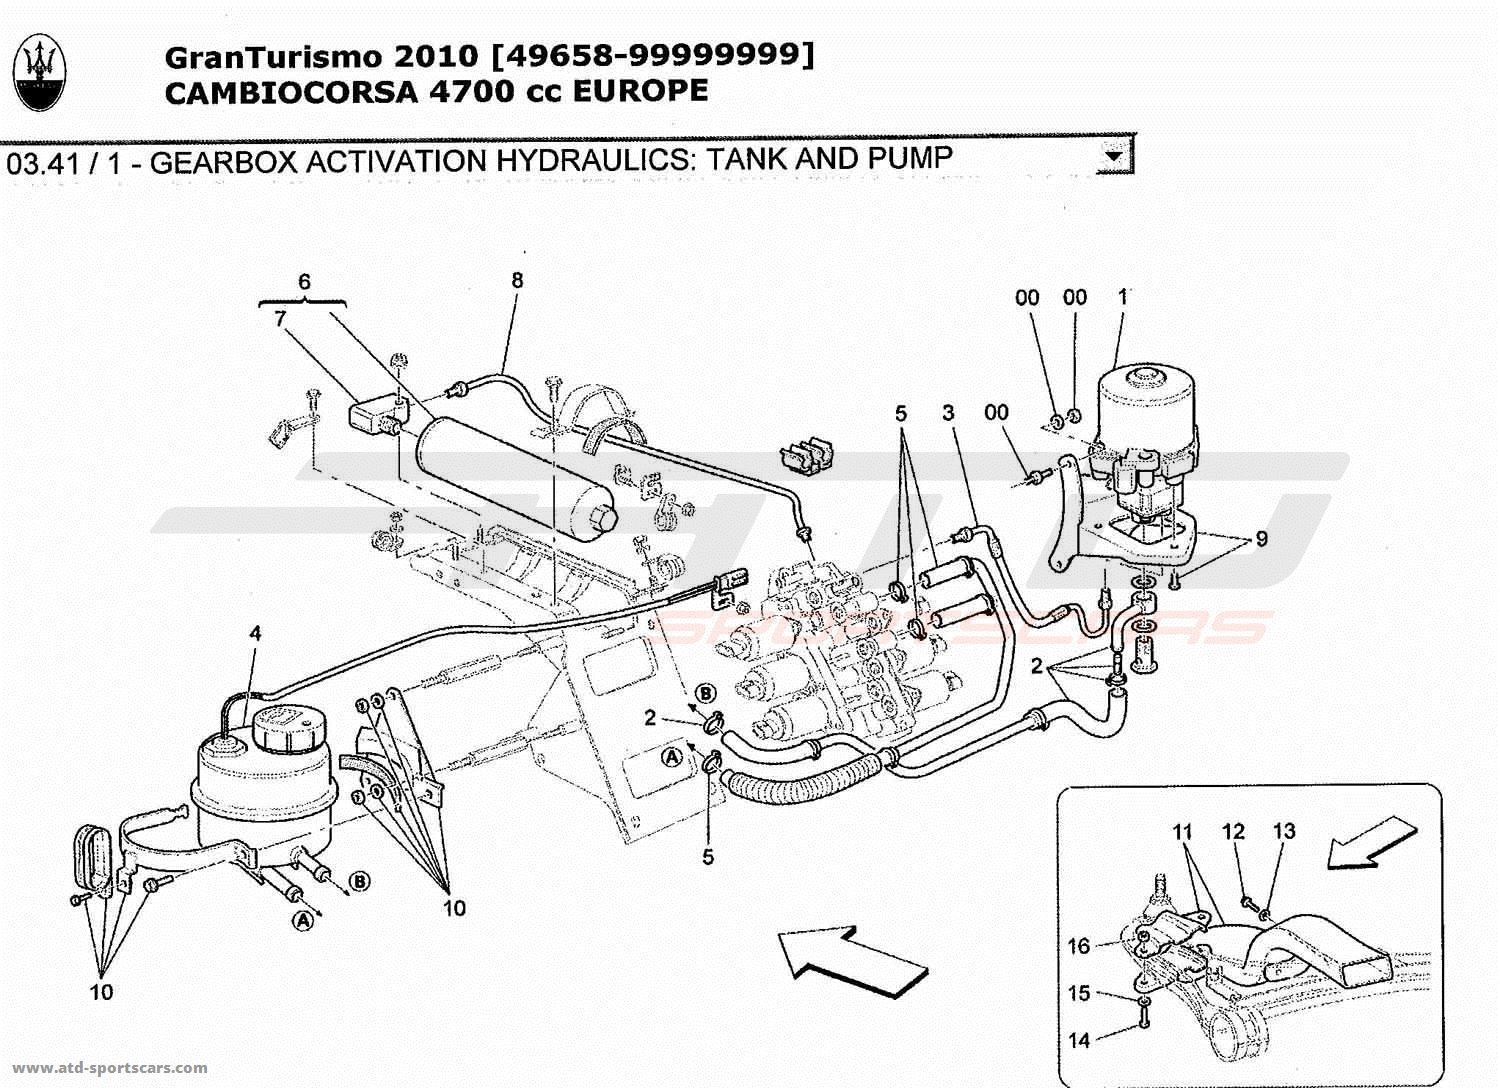 GEARBOX ACTIVATION HYDRAULICS: TANK AND PUMP